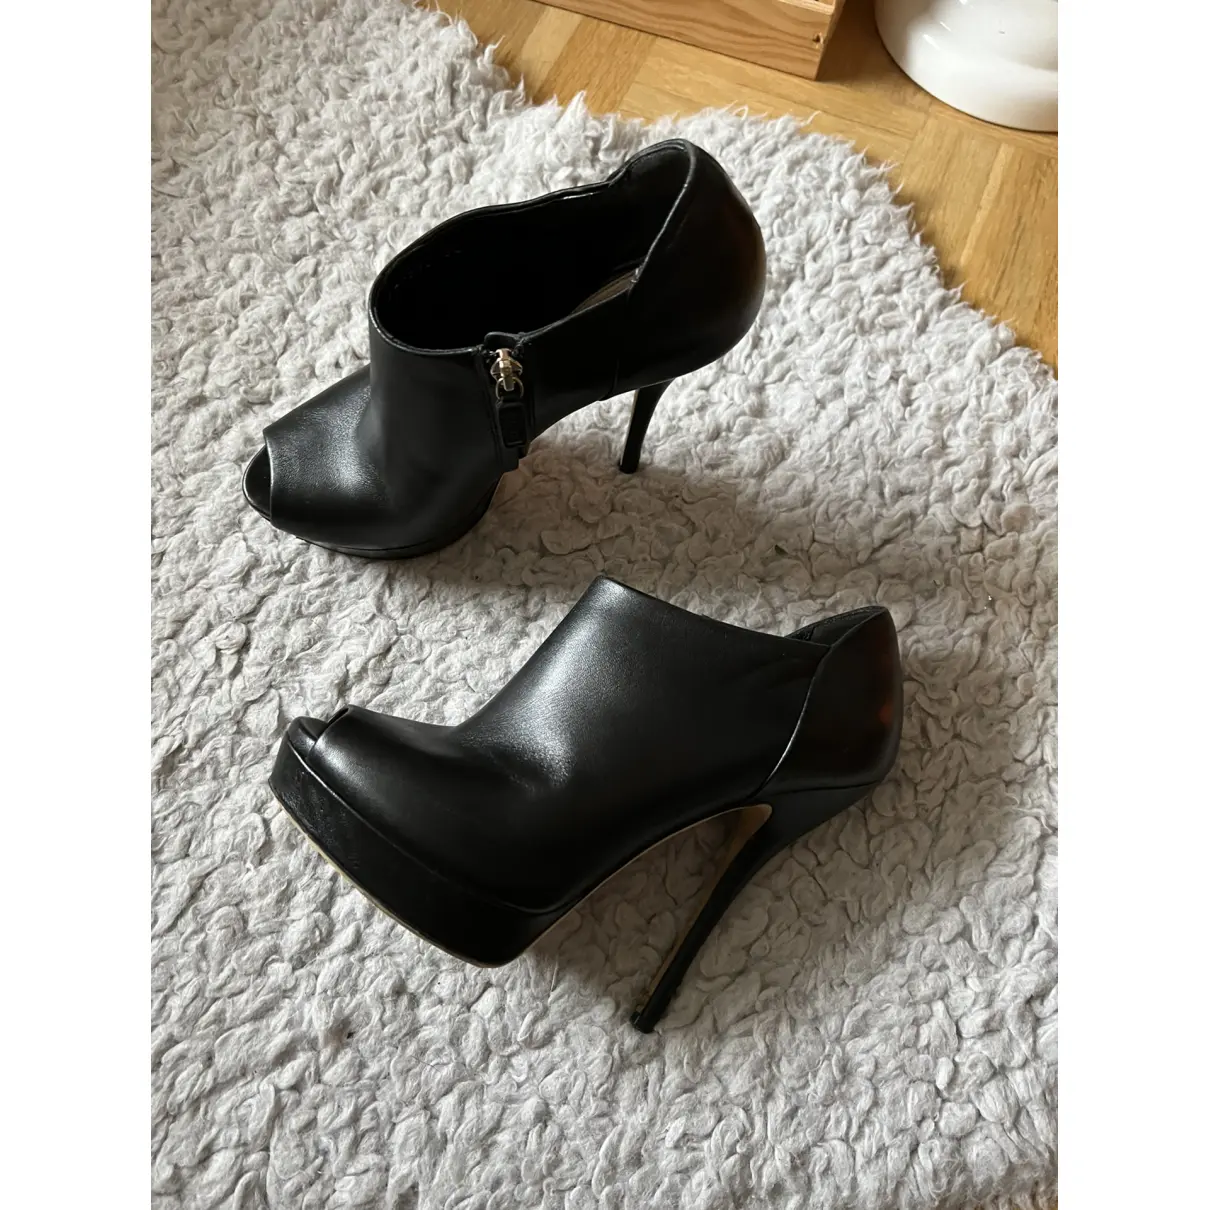 Luxury Gucci Ankle boots Women - Vintage